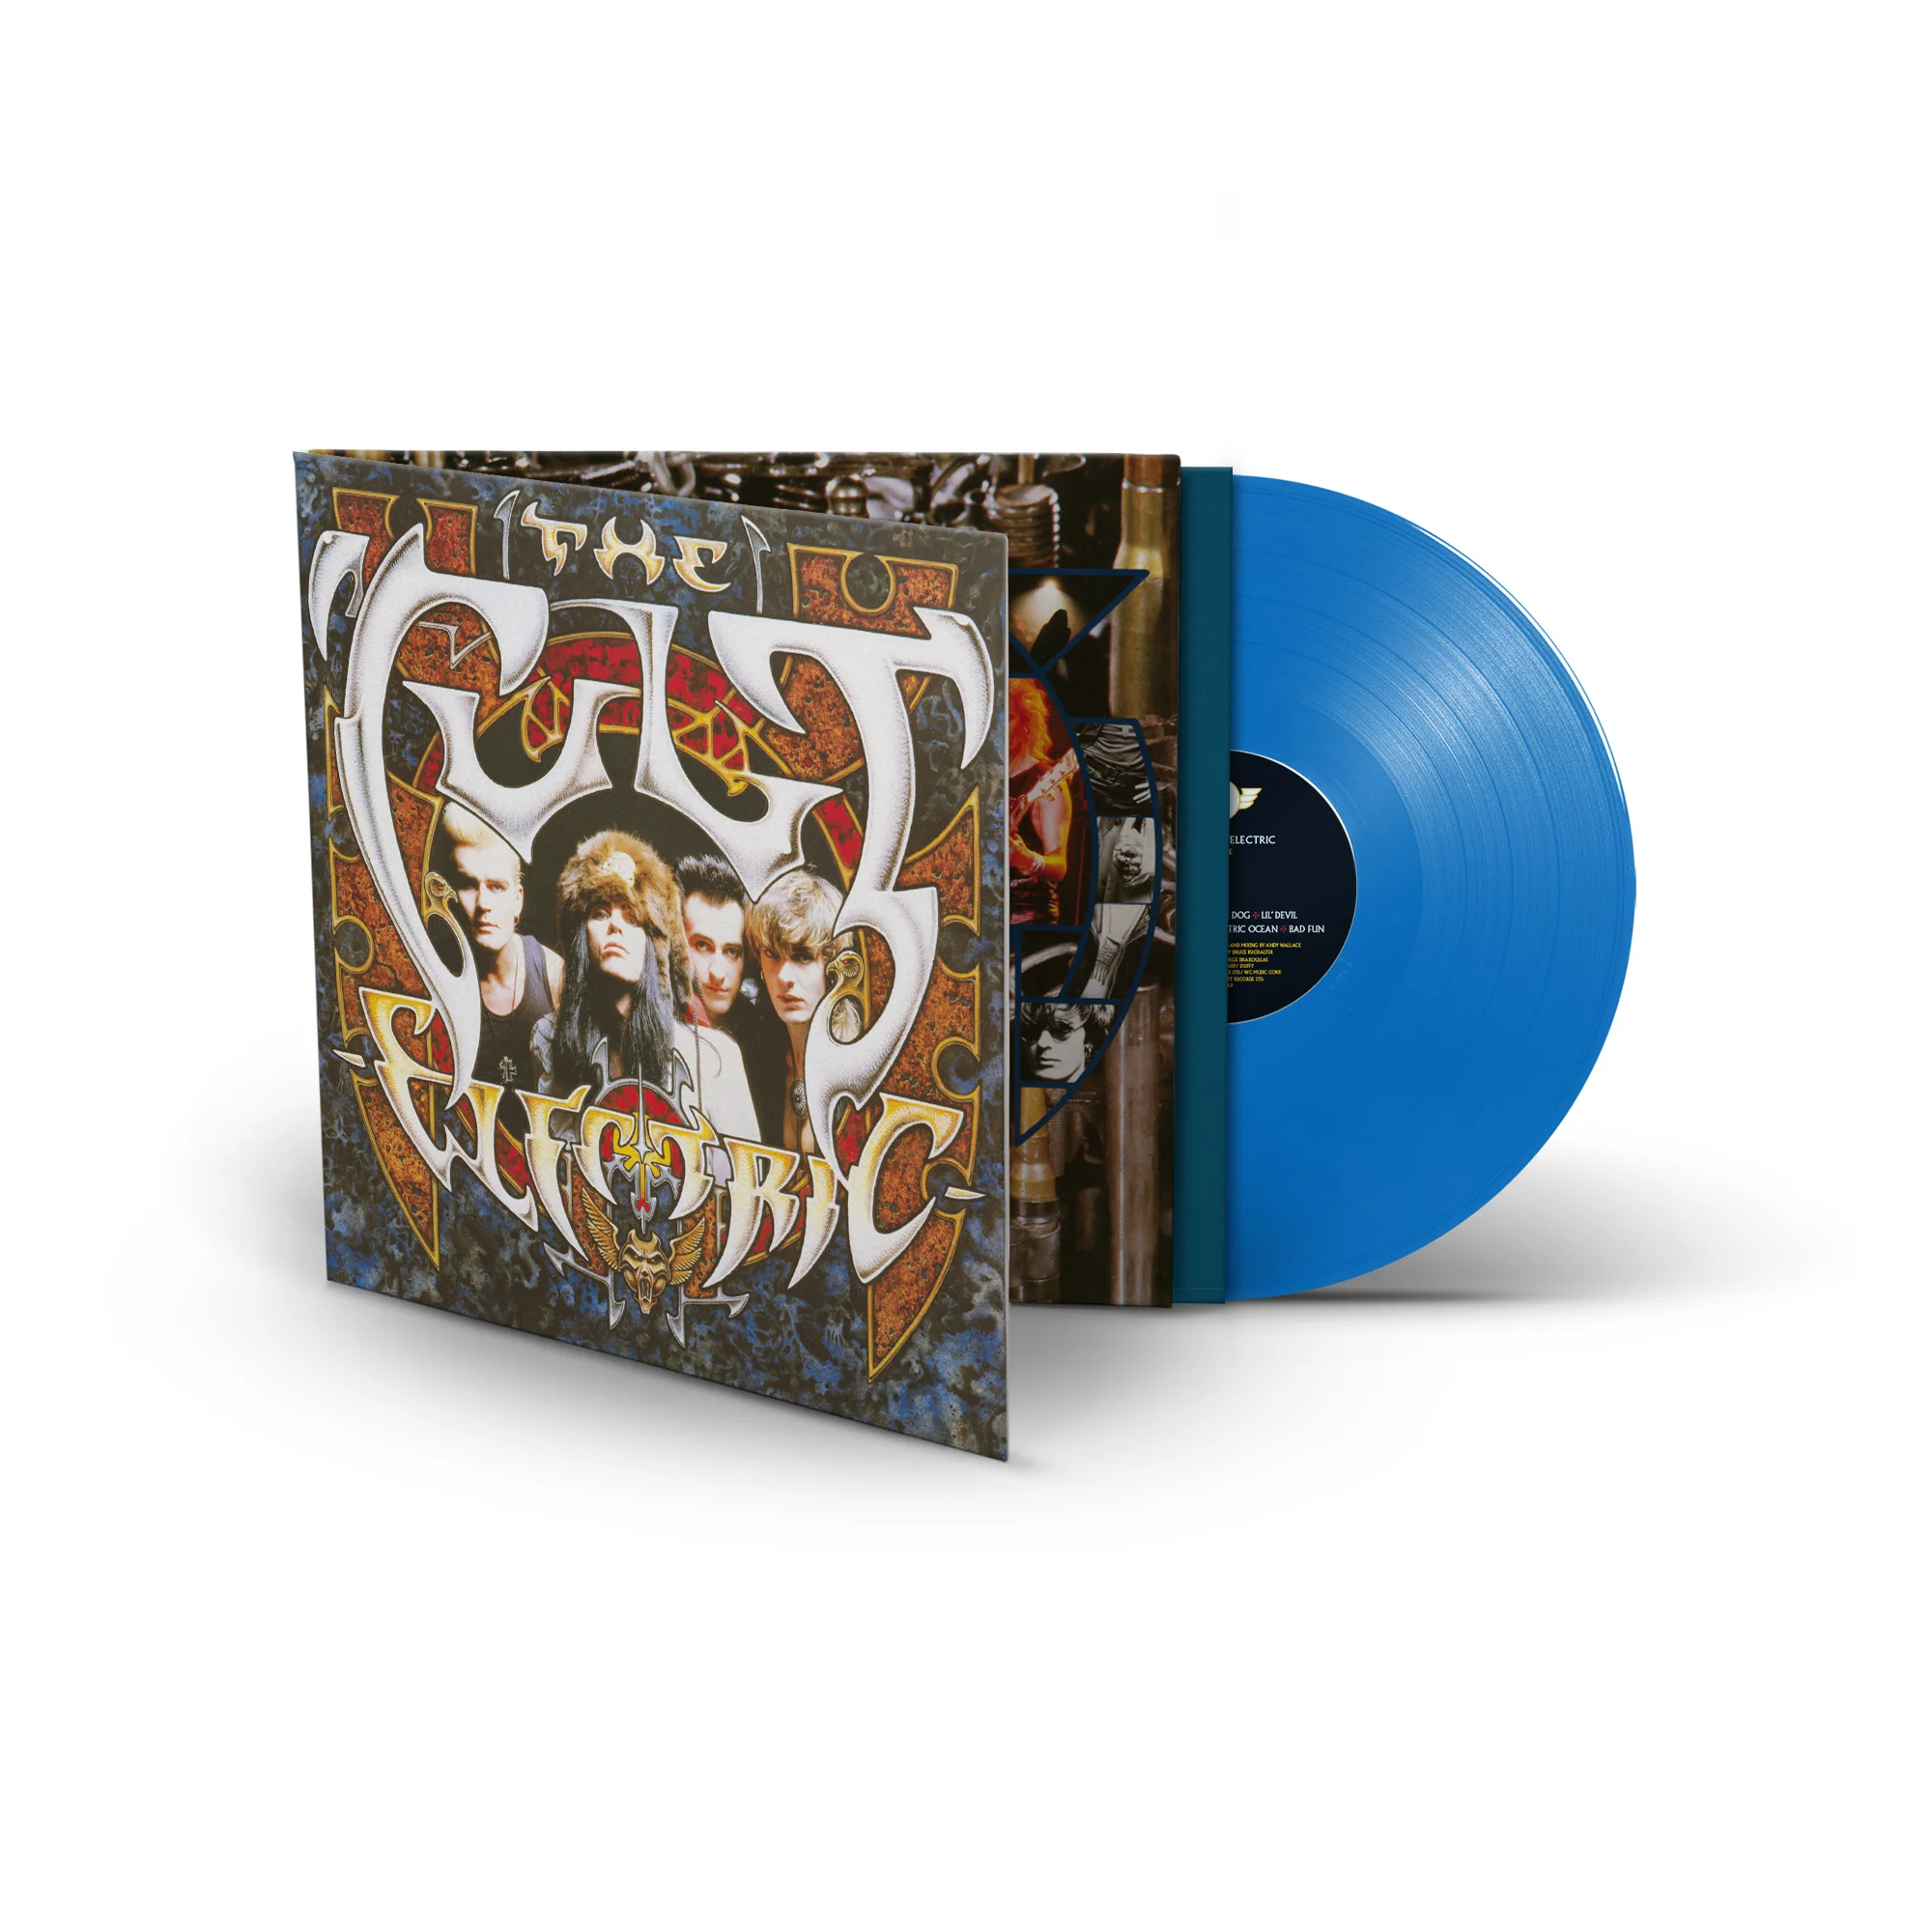 The Cult "Electric" Opaque Blue 🔵 LP